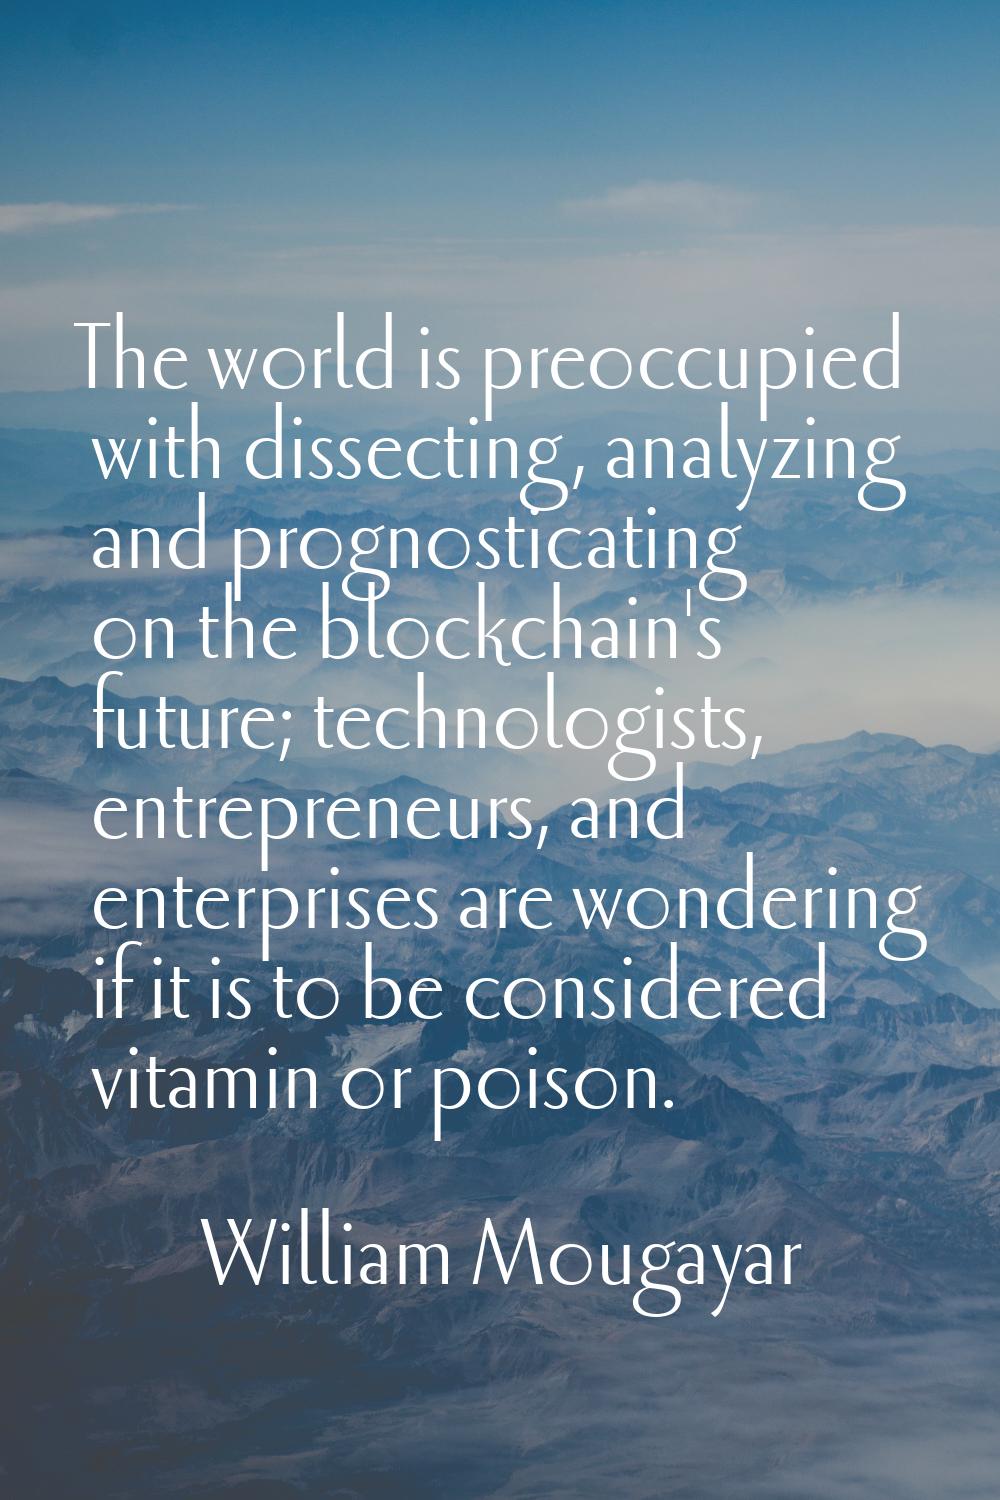 The world is preoccupied with dissecting, analyzing and prognosticating on the blockchain's future;